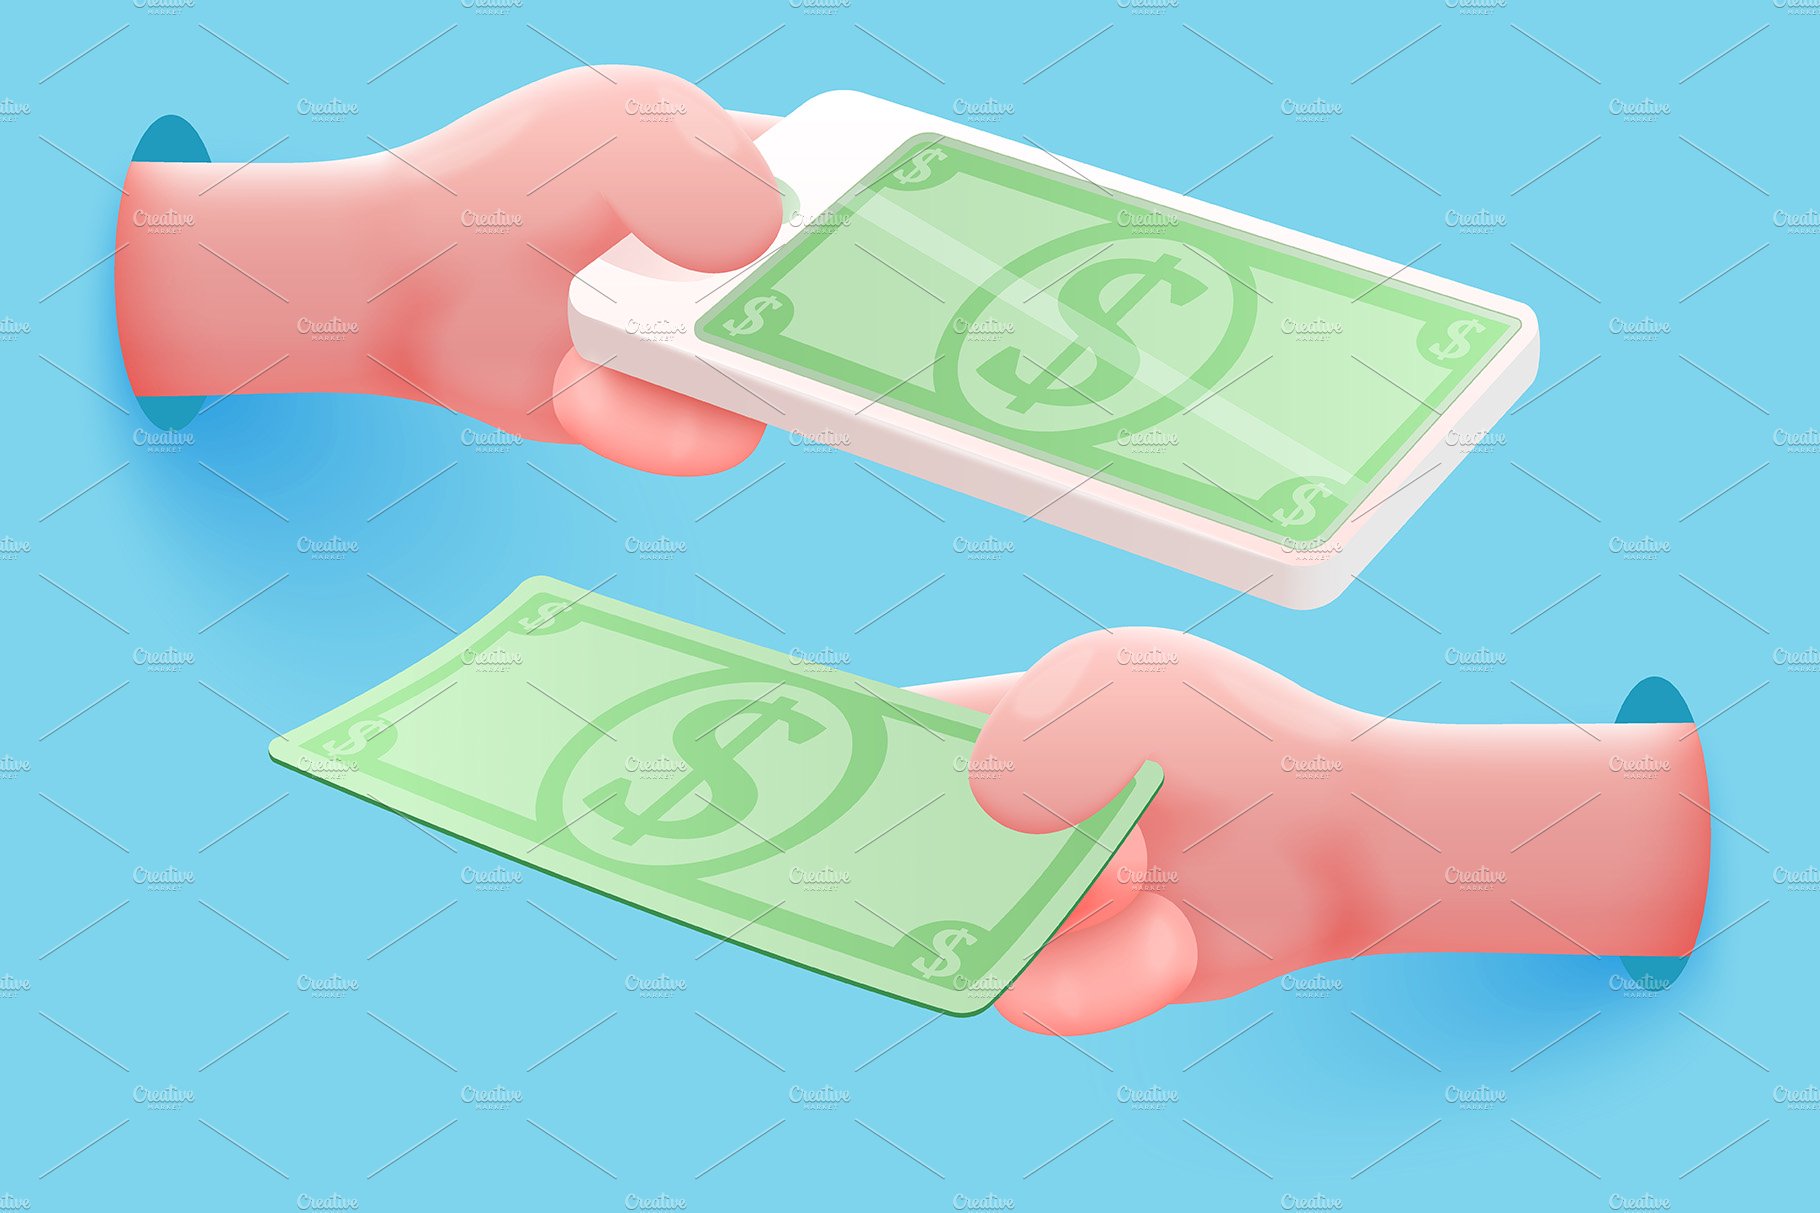 A pair of hands exchanging money against a blue background.